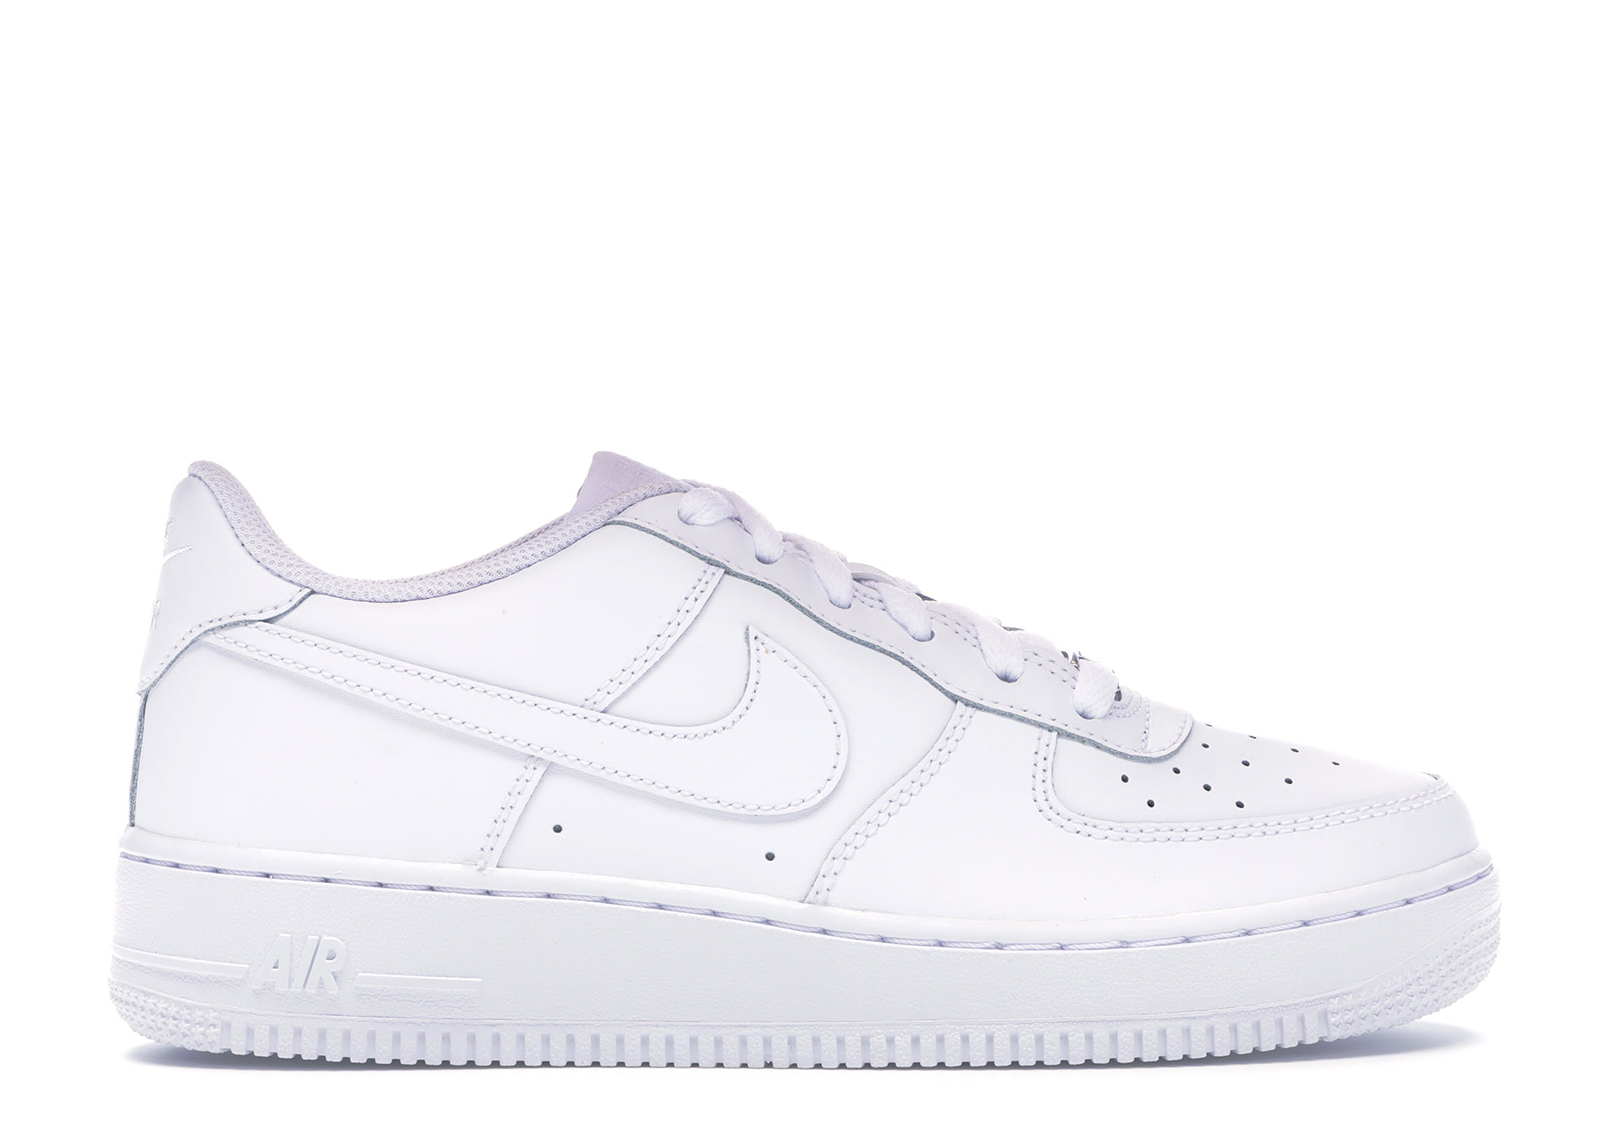 Nike Air Force 1 Low White 2014 (GS) - 314192-117